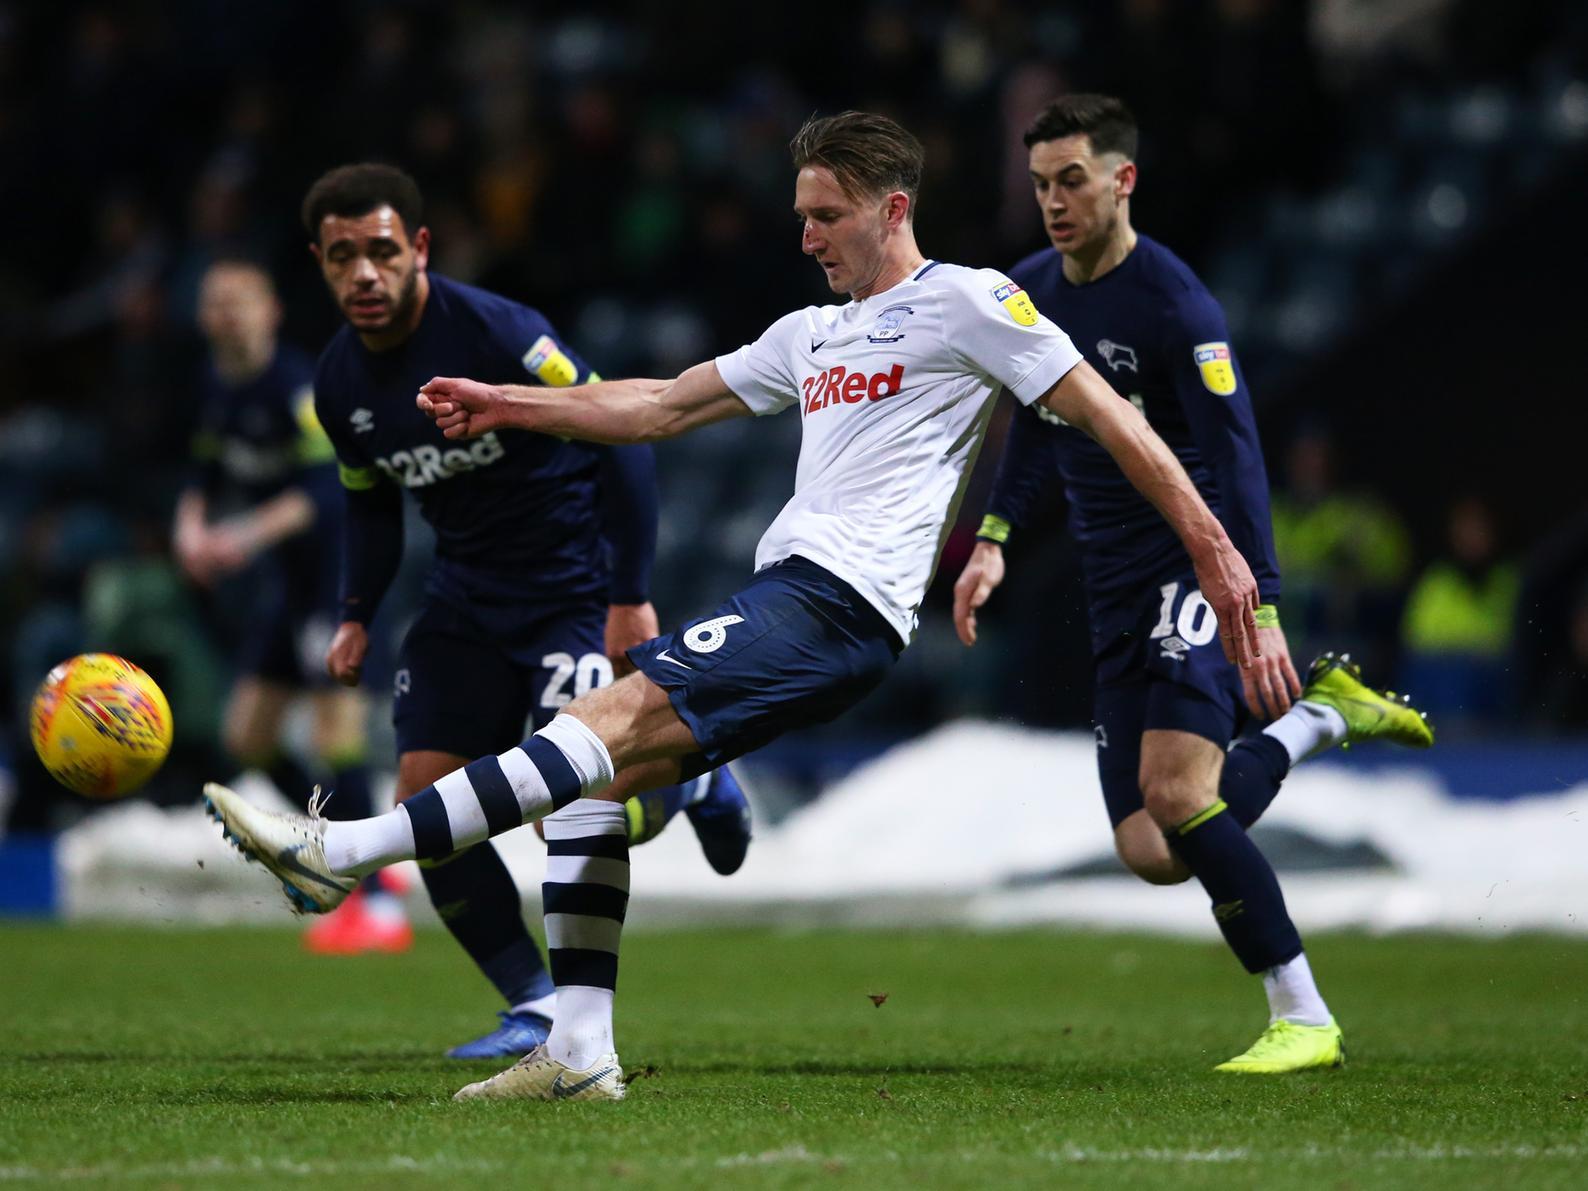 Leicester City are said to be lining up a move for Preston North End's star defender Ben Davies, if they are unable to prise Southampton centre-back Jan Vestergaard way from his current club. (The Sun)